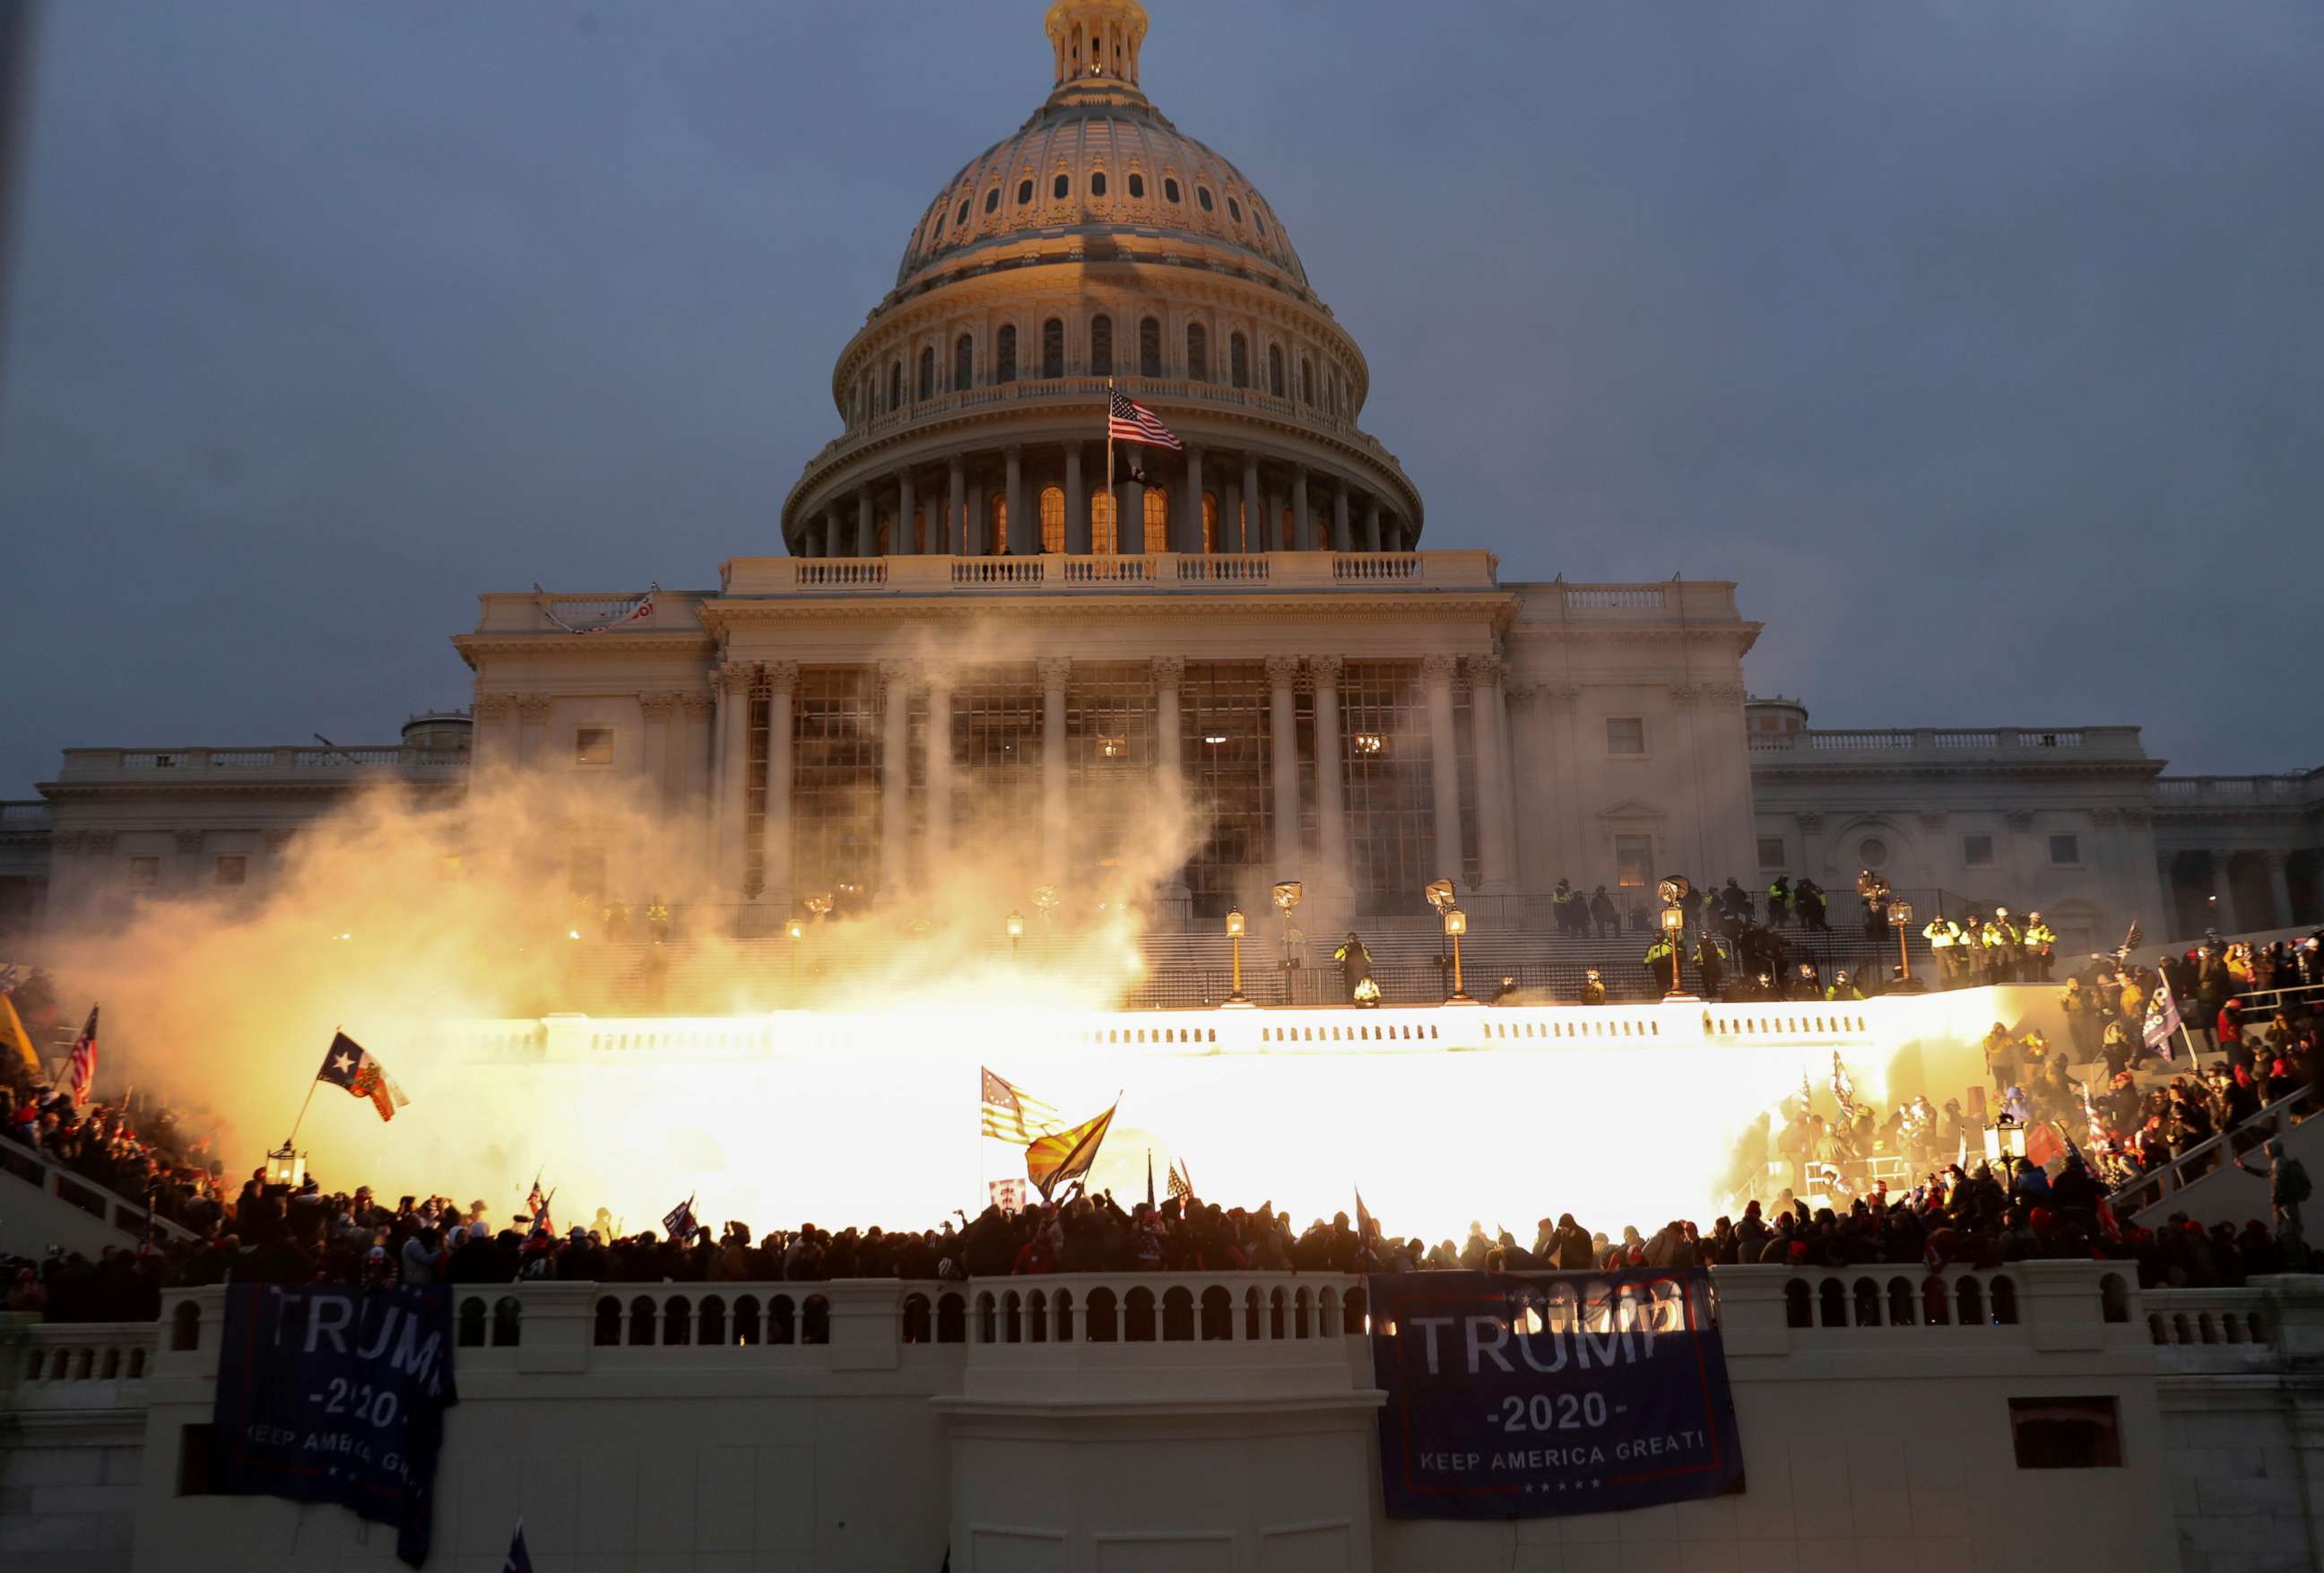 PHOTO: An explosion caused by a police munition is seen while supporters of U.S. President Donald Trump gather in front of the U.S. Capitol building in Washington, D.C., on Jan. 6, 2021.